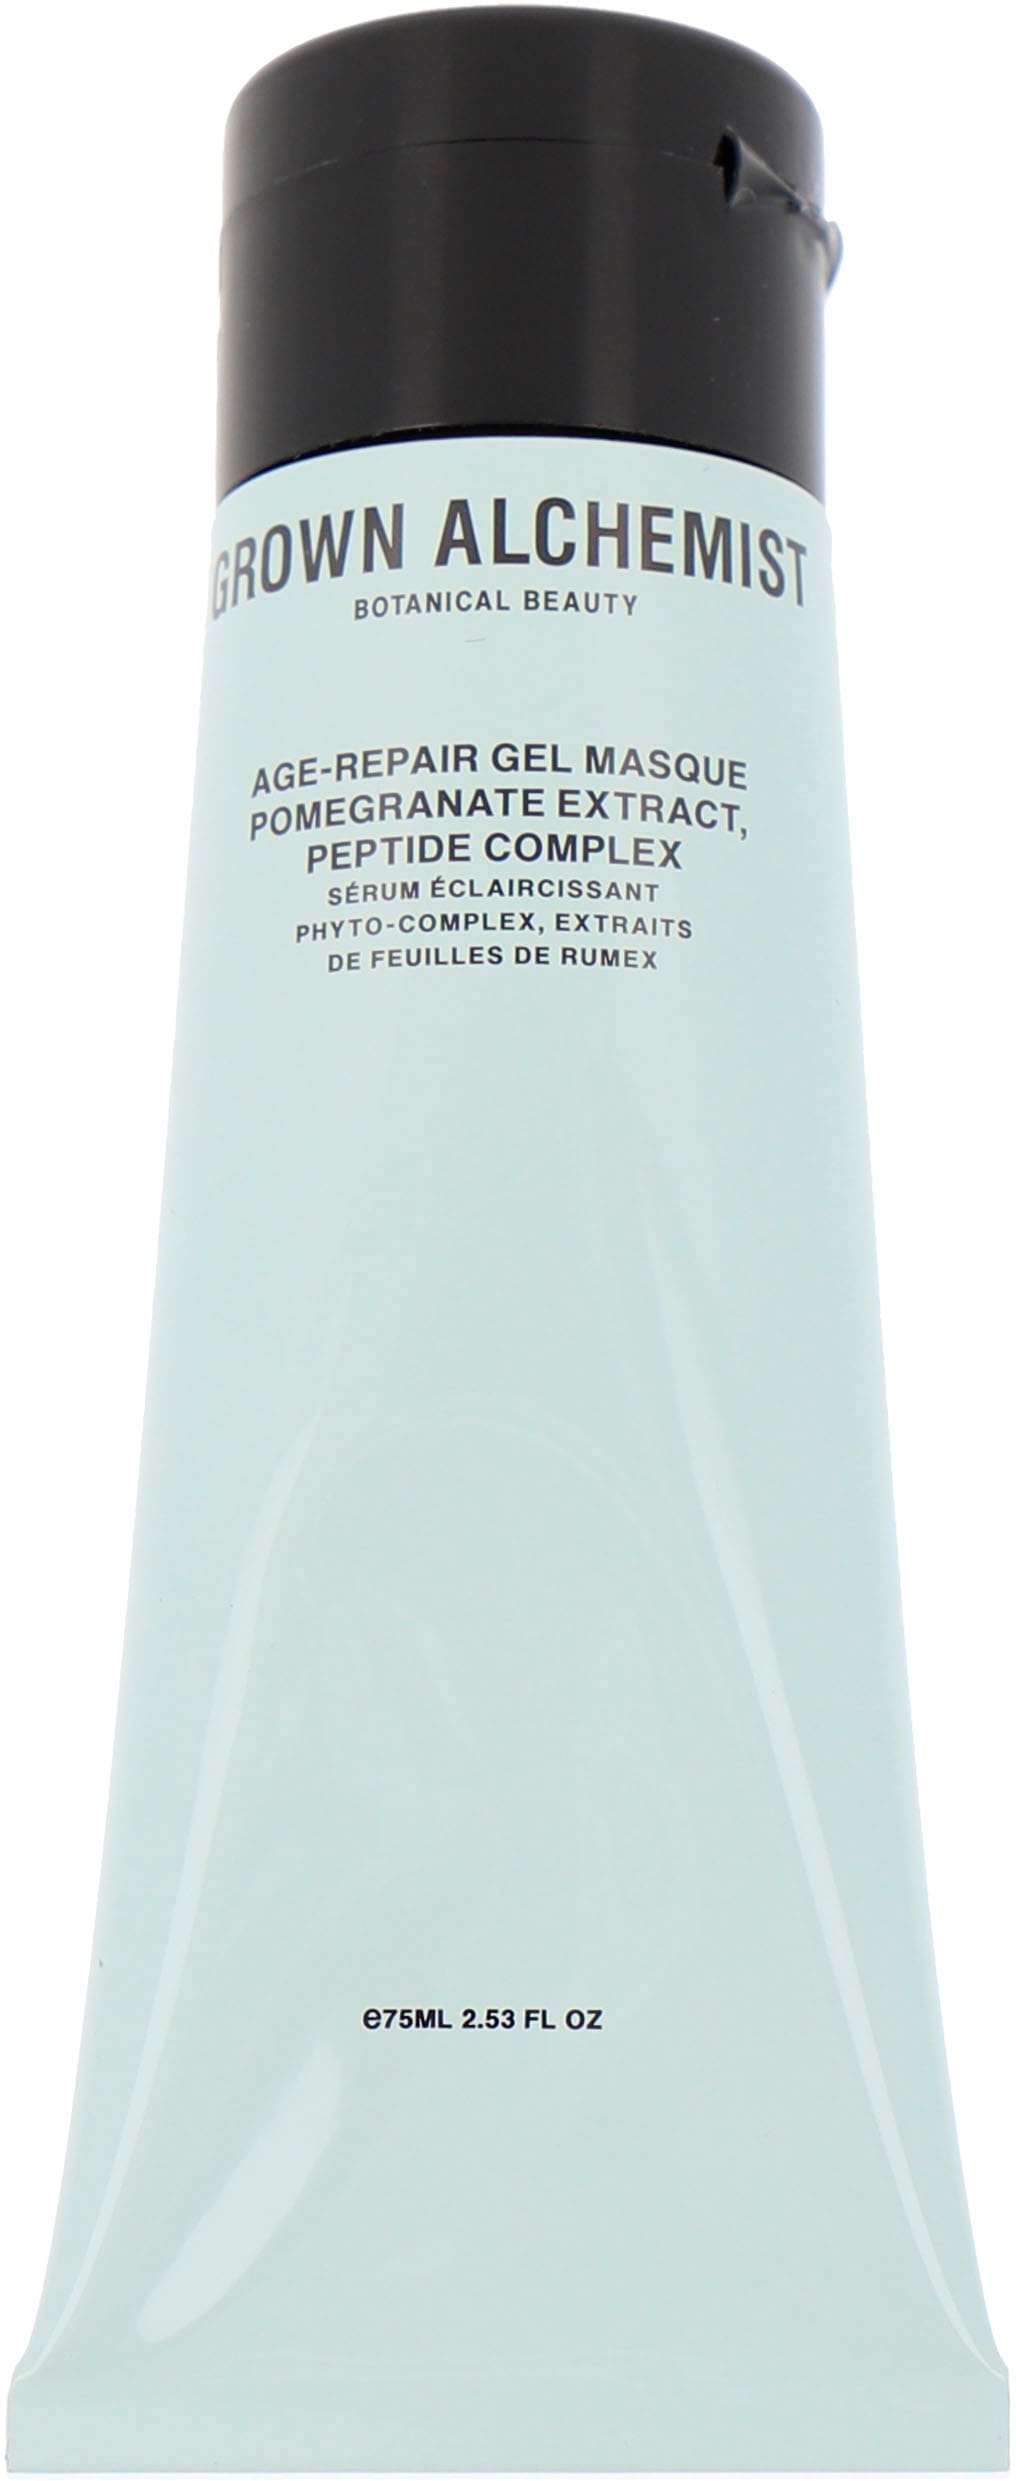 Gesichtsmaske »Age-Repair Gel Masque«, Pomegranate Extract, Peptide Complex